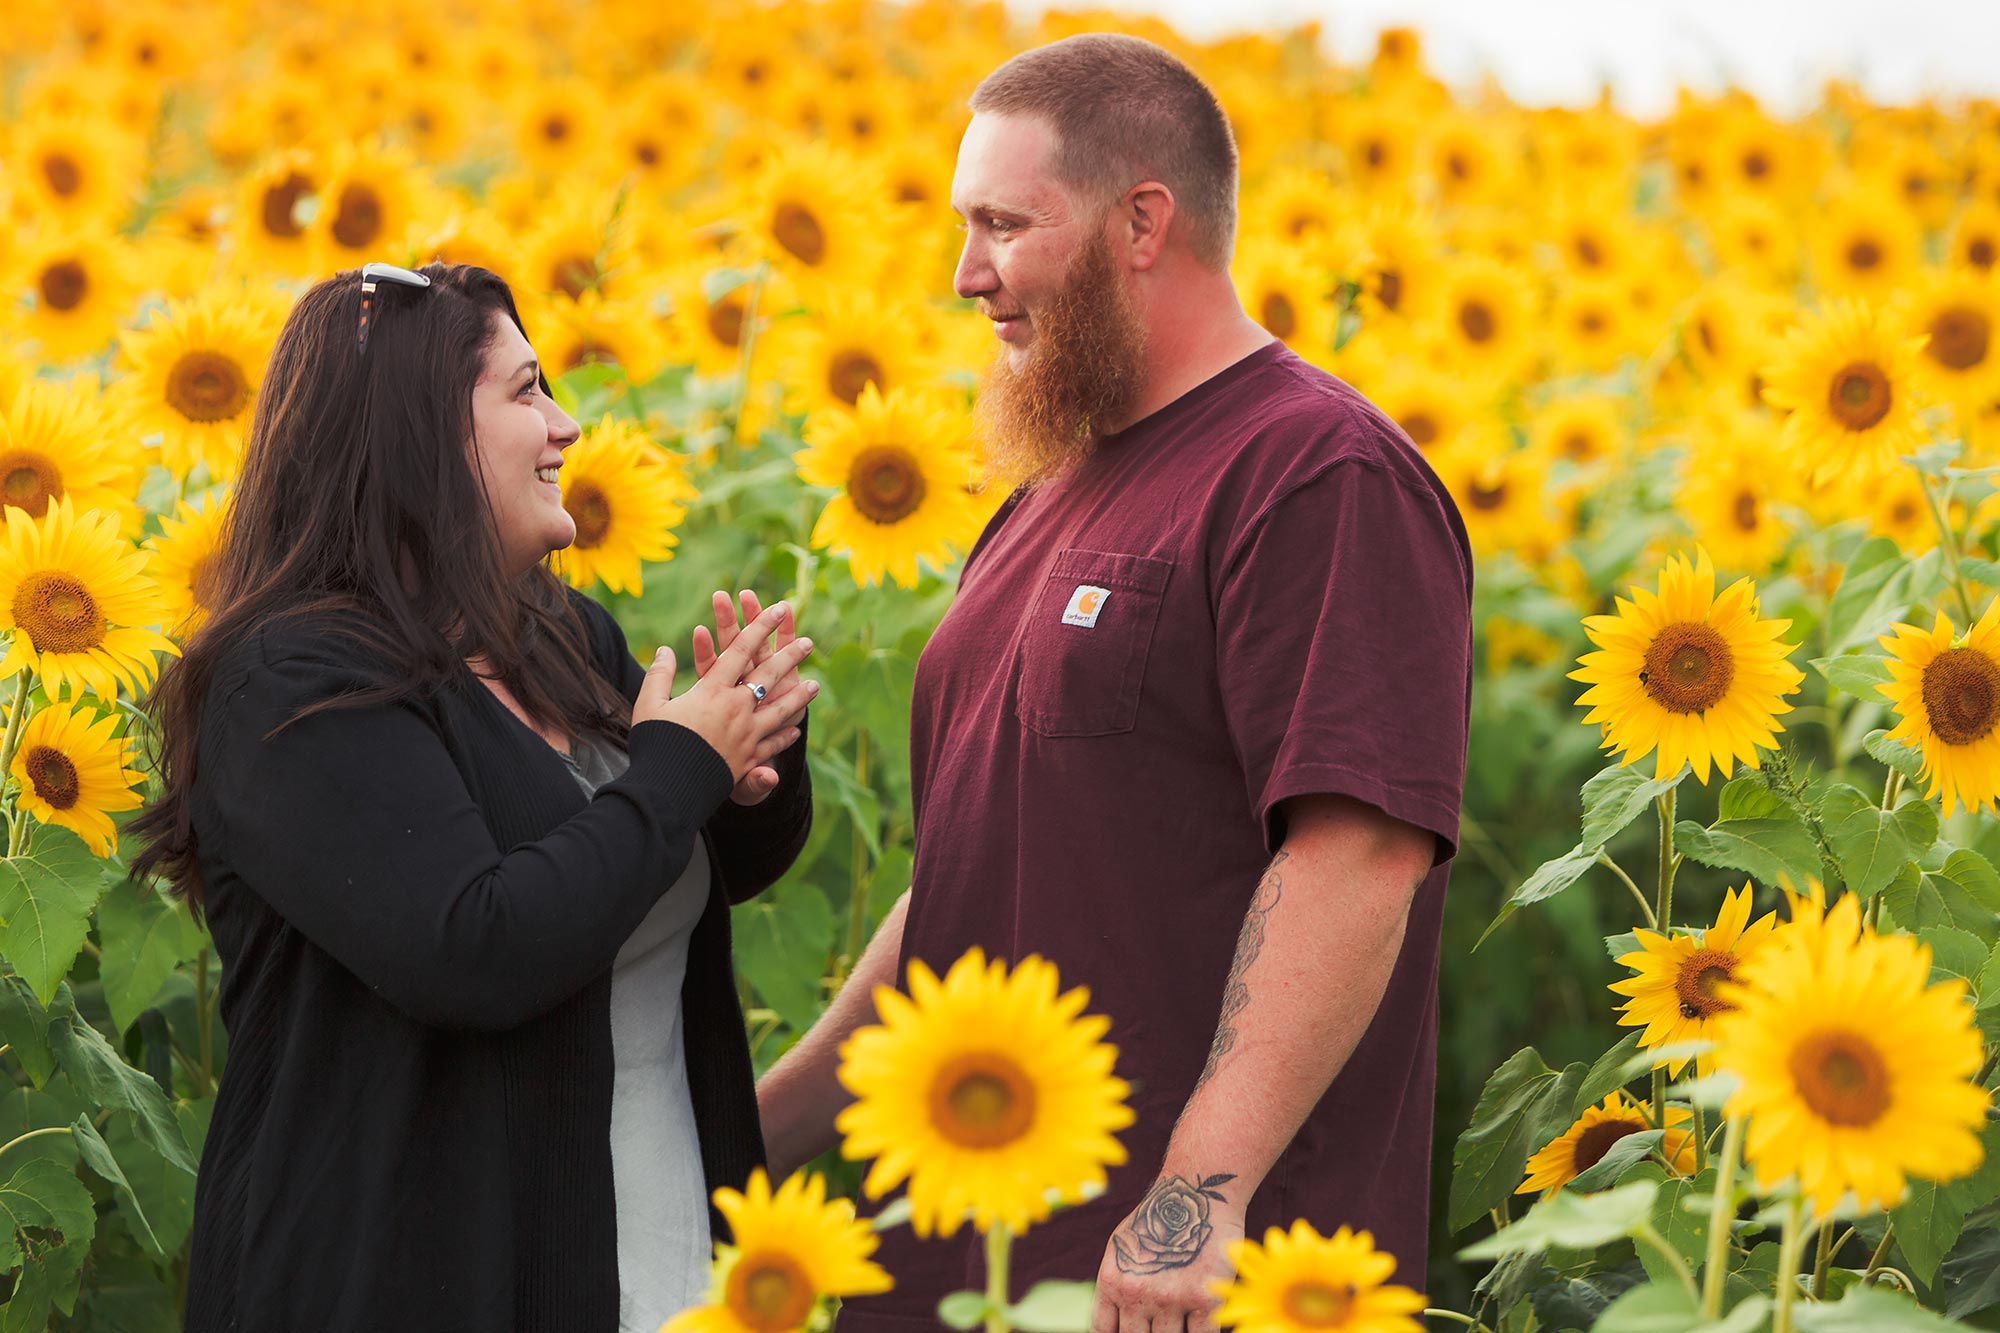 Colby Farm Sunflower Engagement Picture | Stephen Grant Photography